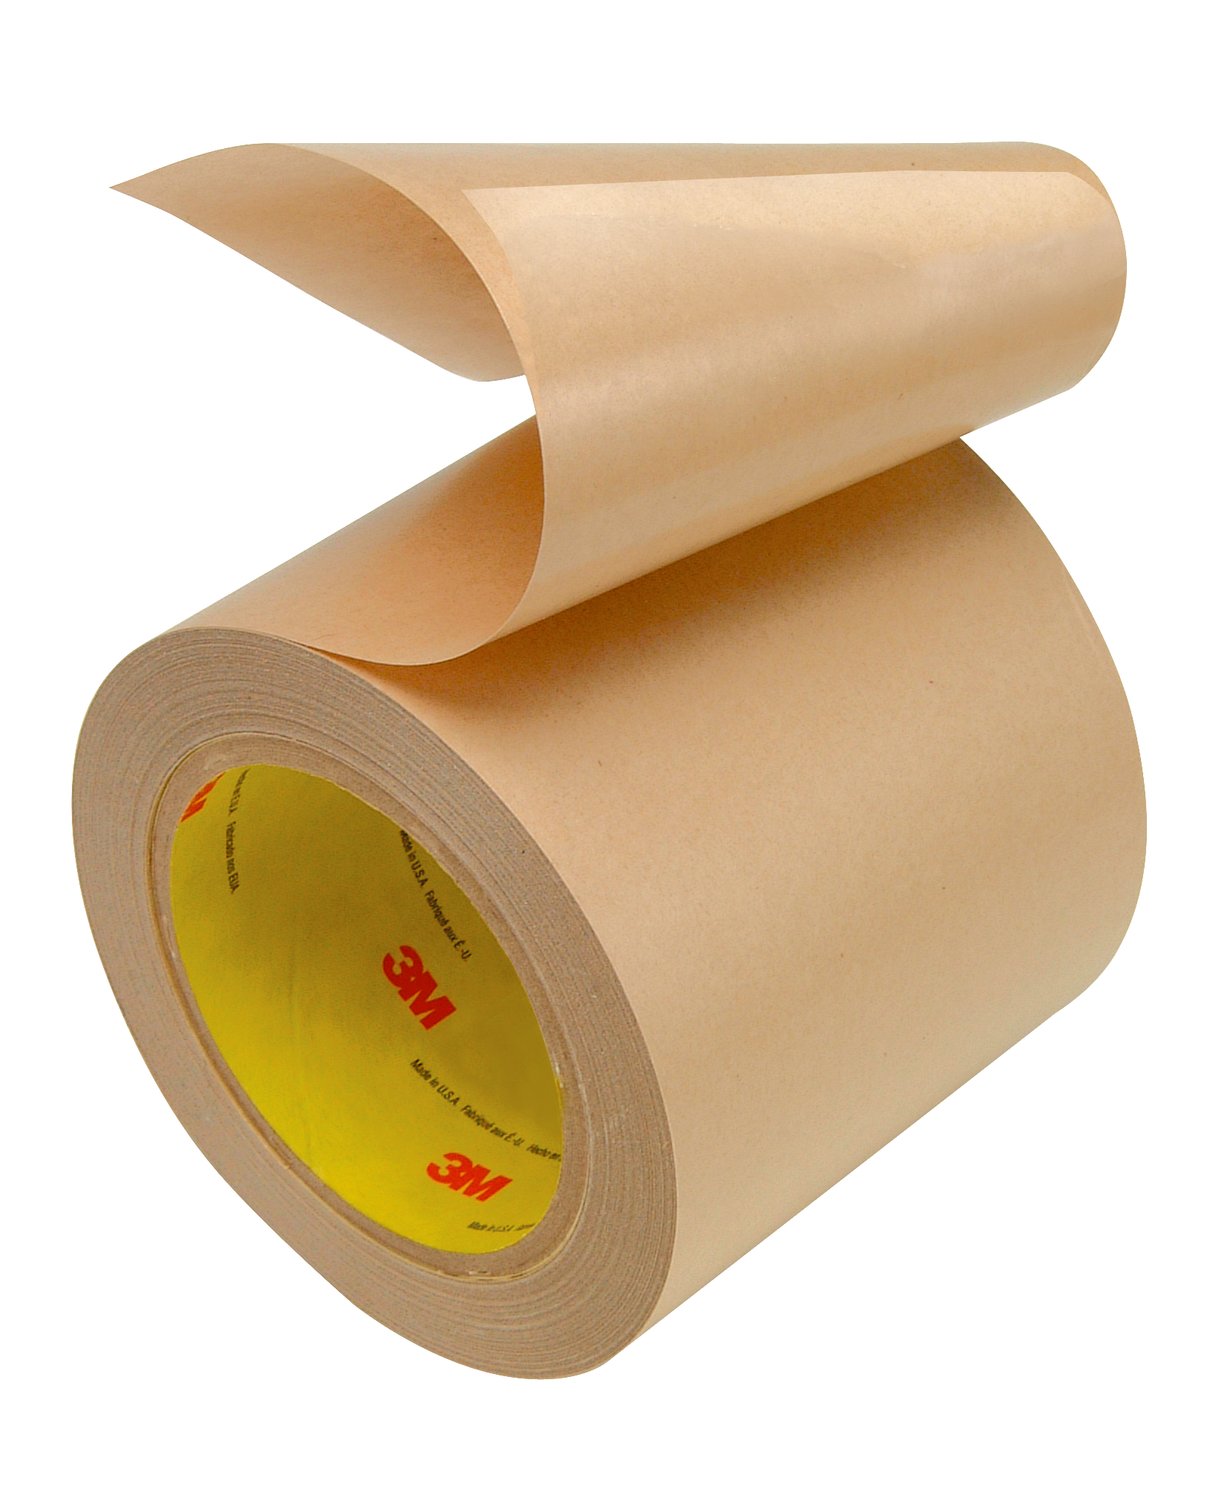 7000001225 - 3M Electrically Conductive Adhesive Transfer Tape 9703, 12 in x 36 yds,
1 roll per case Bulk